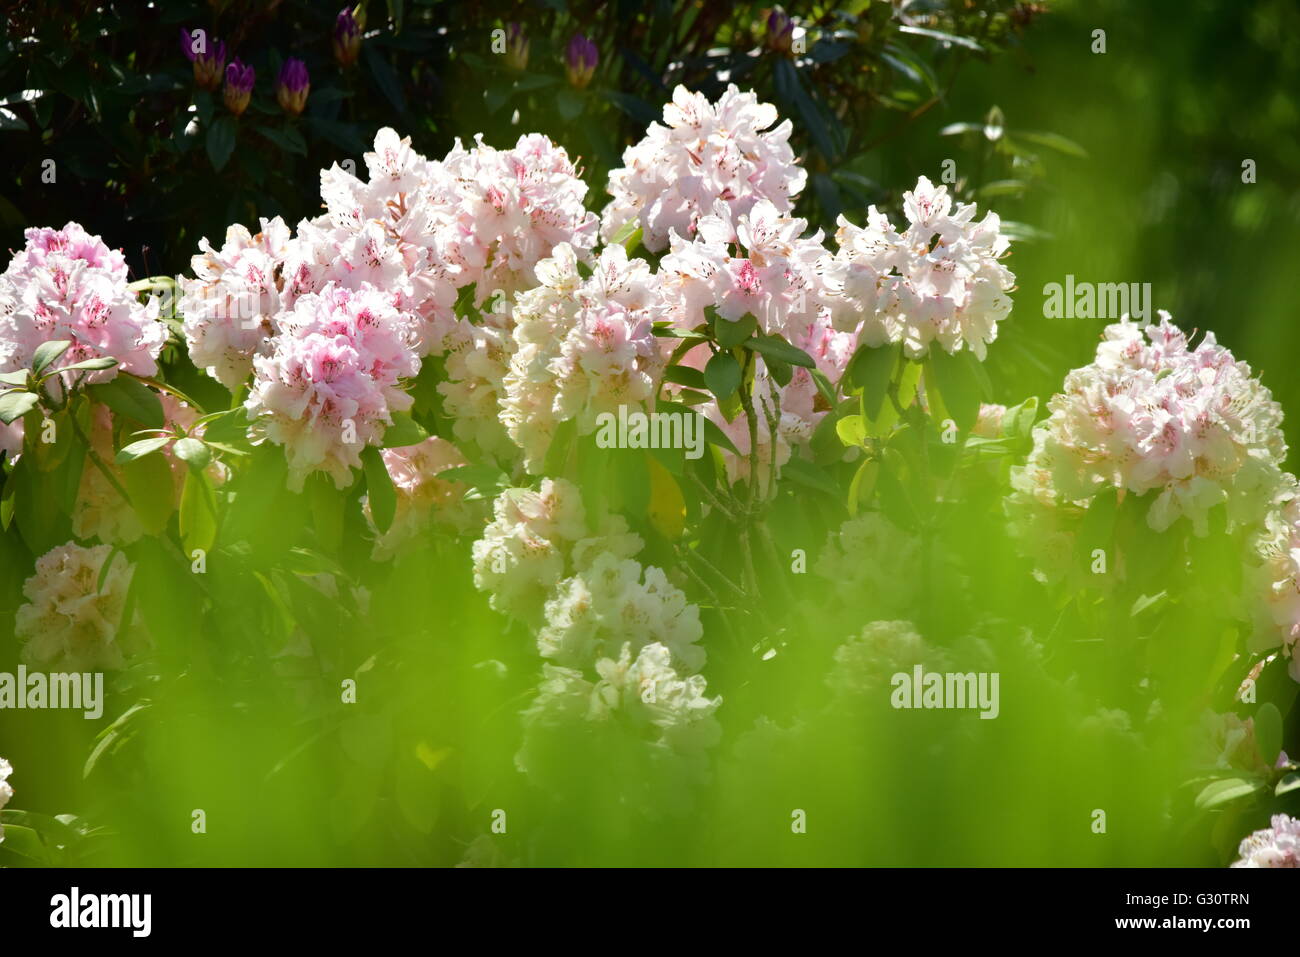 Rhododendron bush with pink flowers with green grass in the foreground Stock Photo